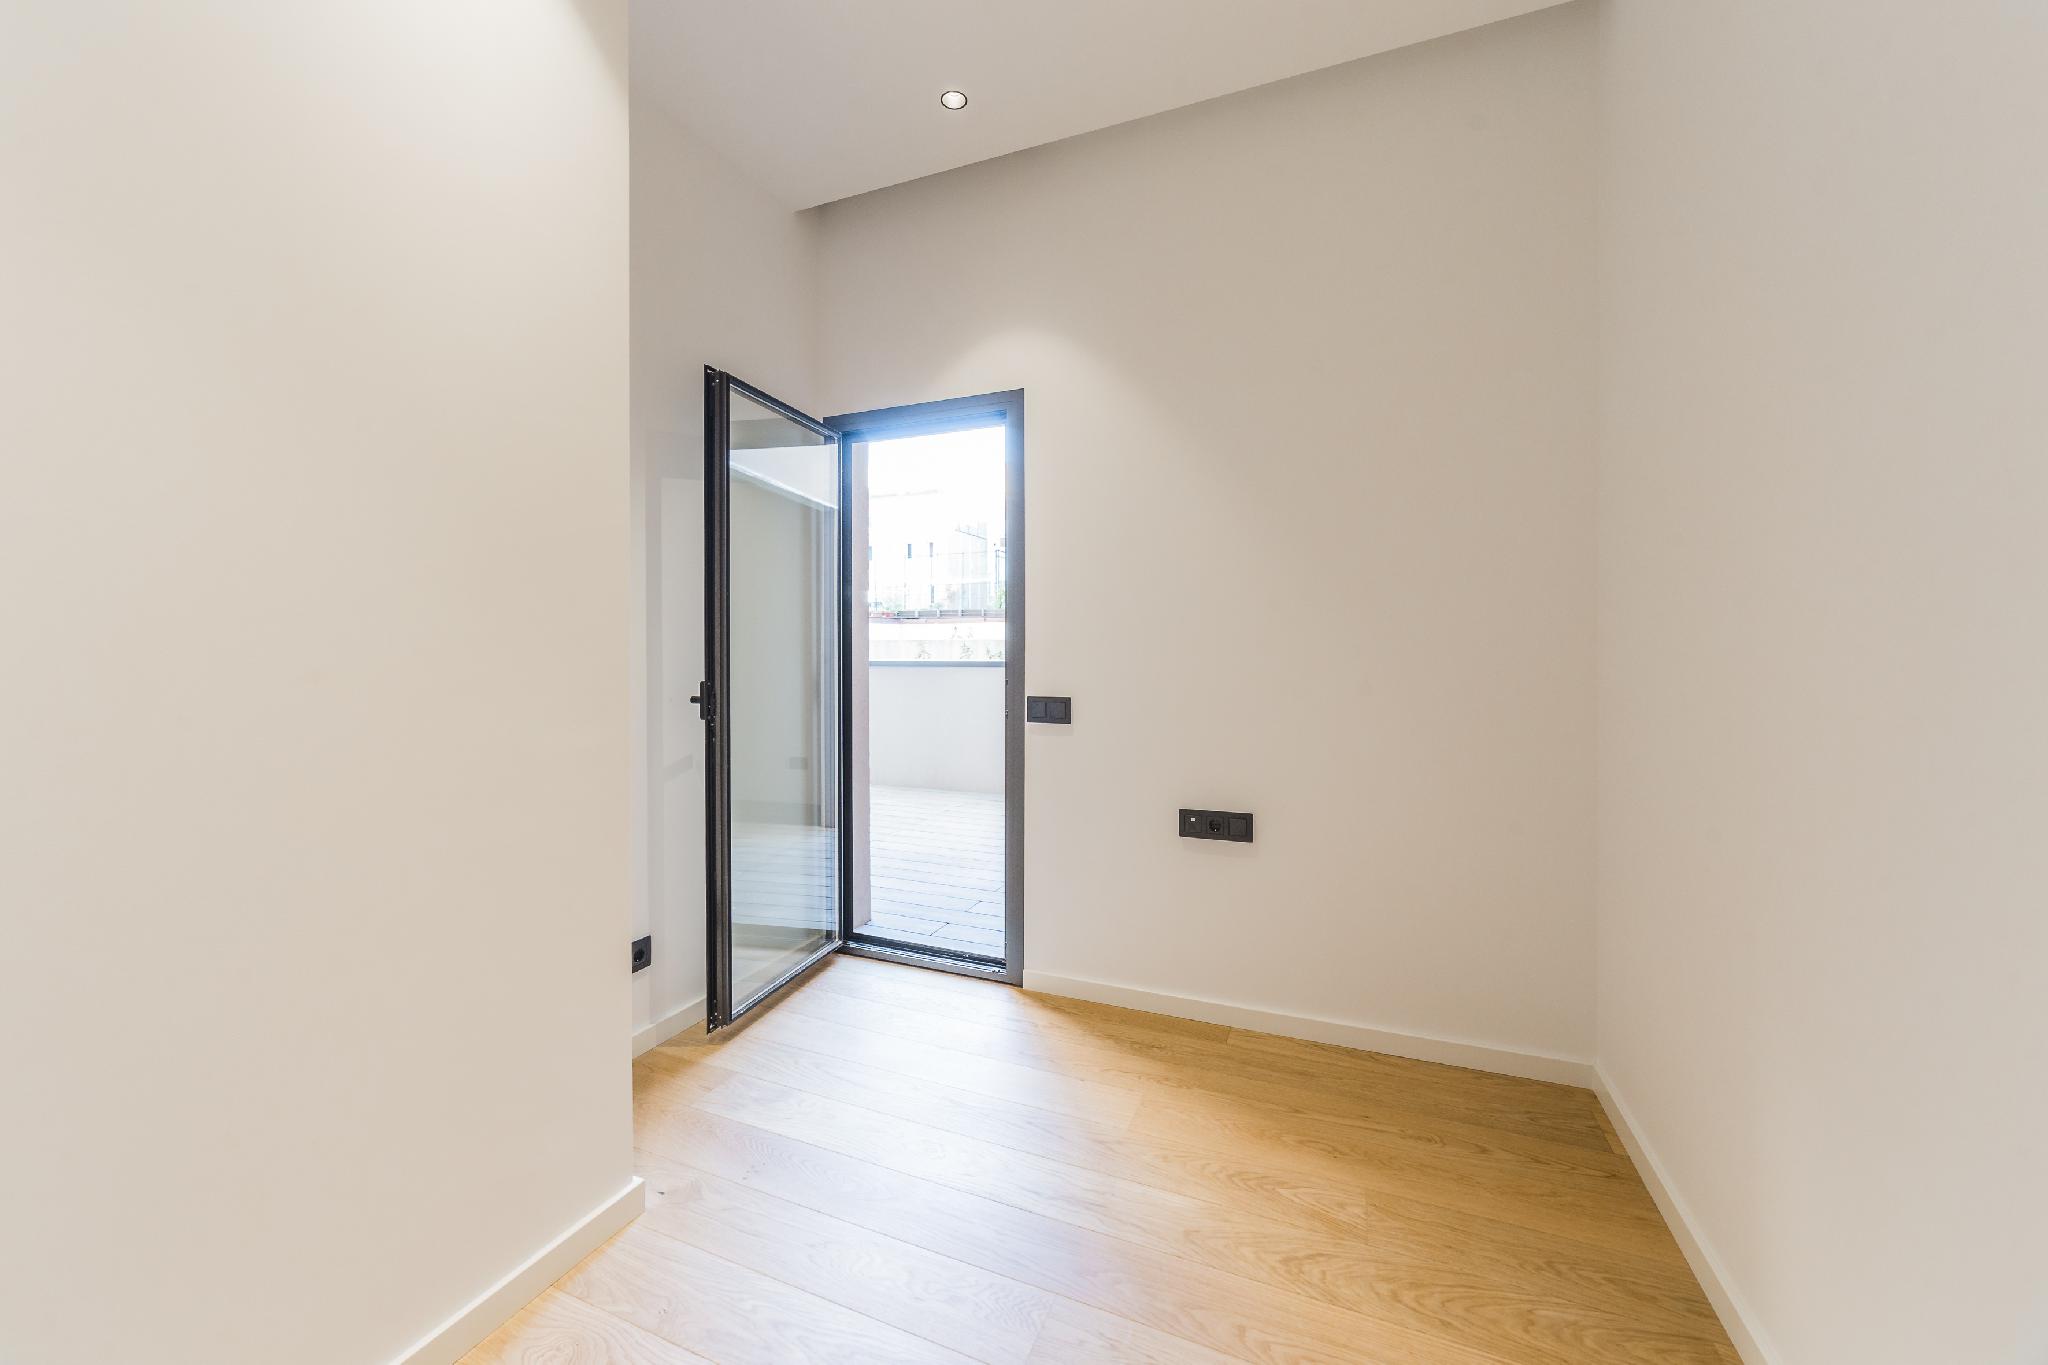 182456 Apartment for sale in Eixample, Old Left Eixample 9